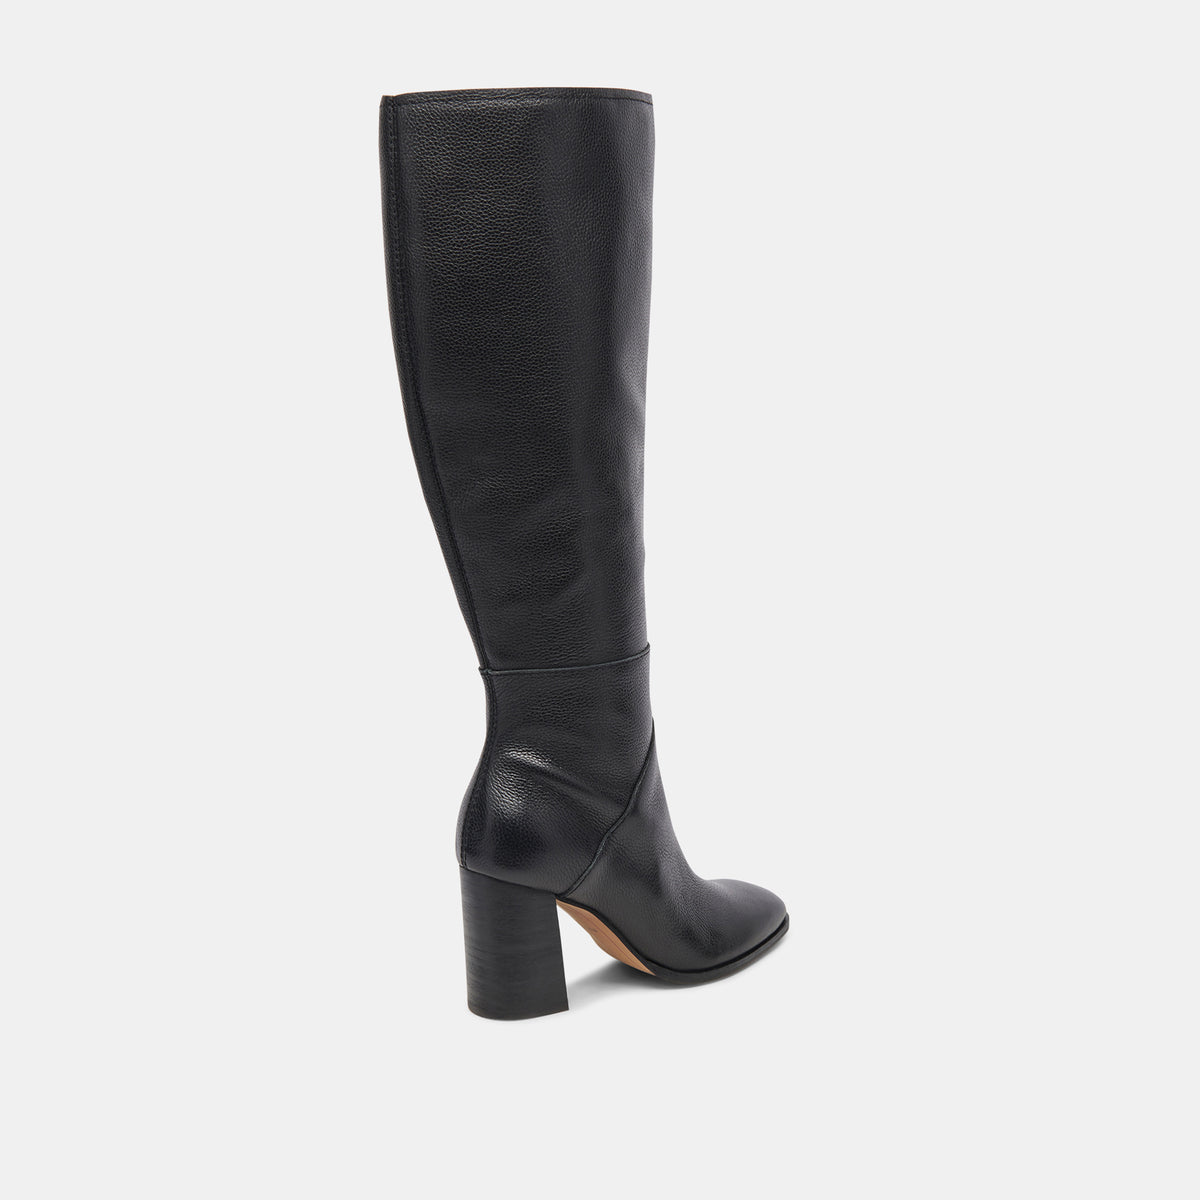 FYNN WIDE CALF BOOTS ONYX LEATHER